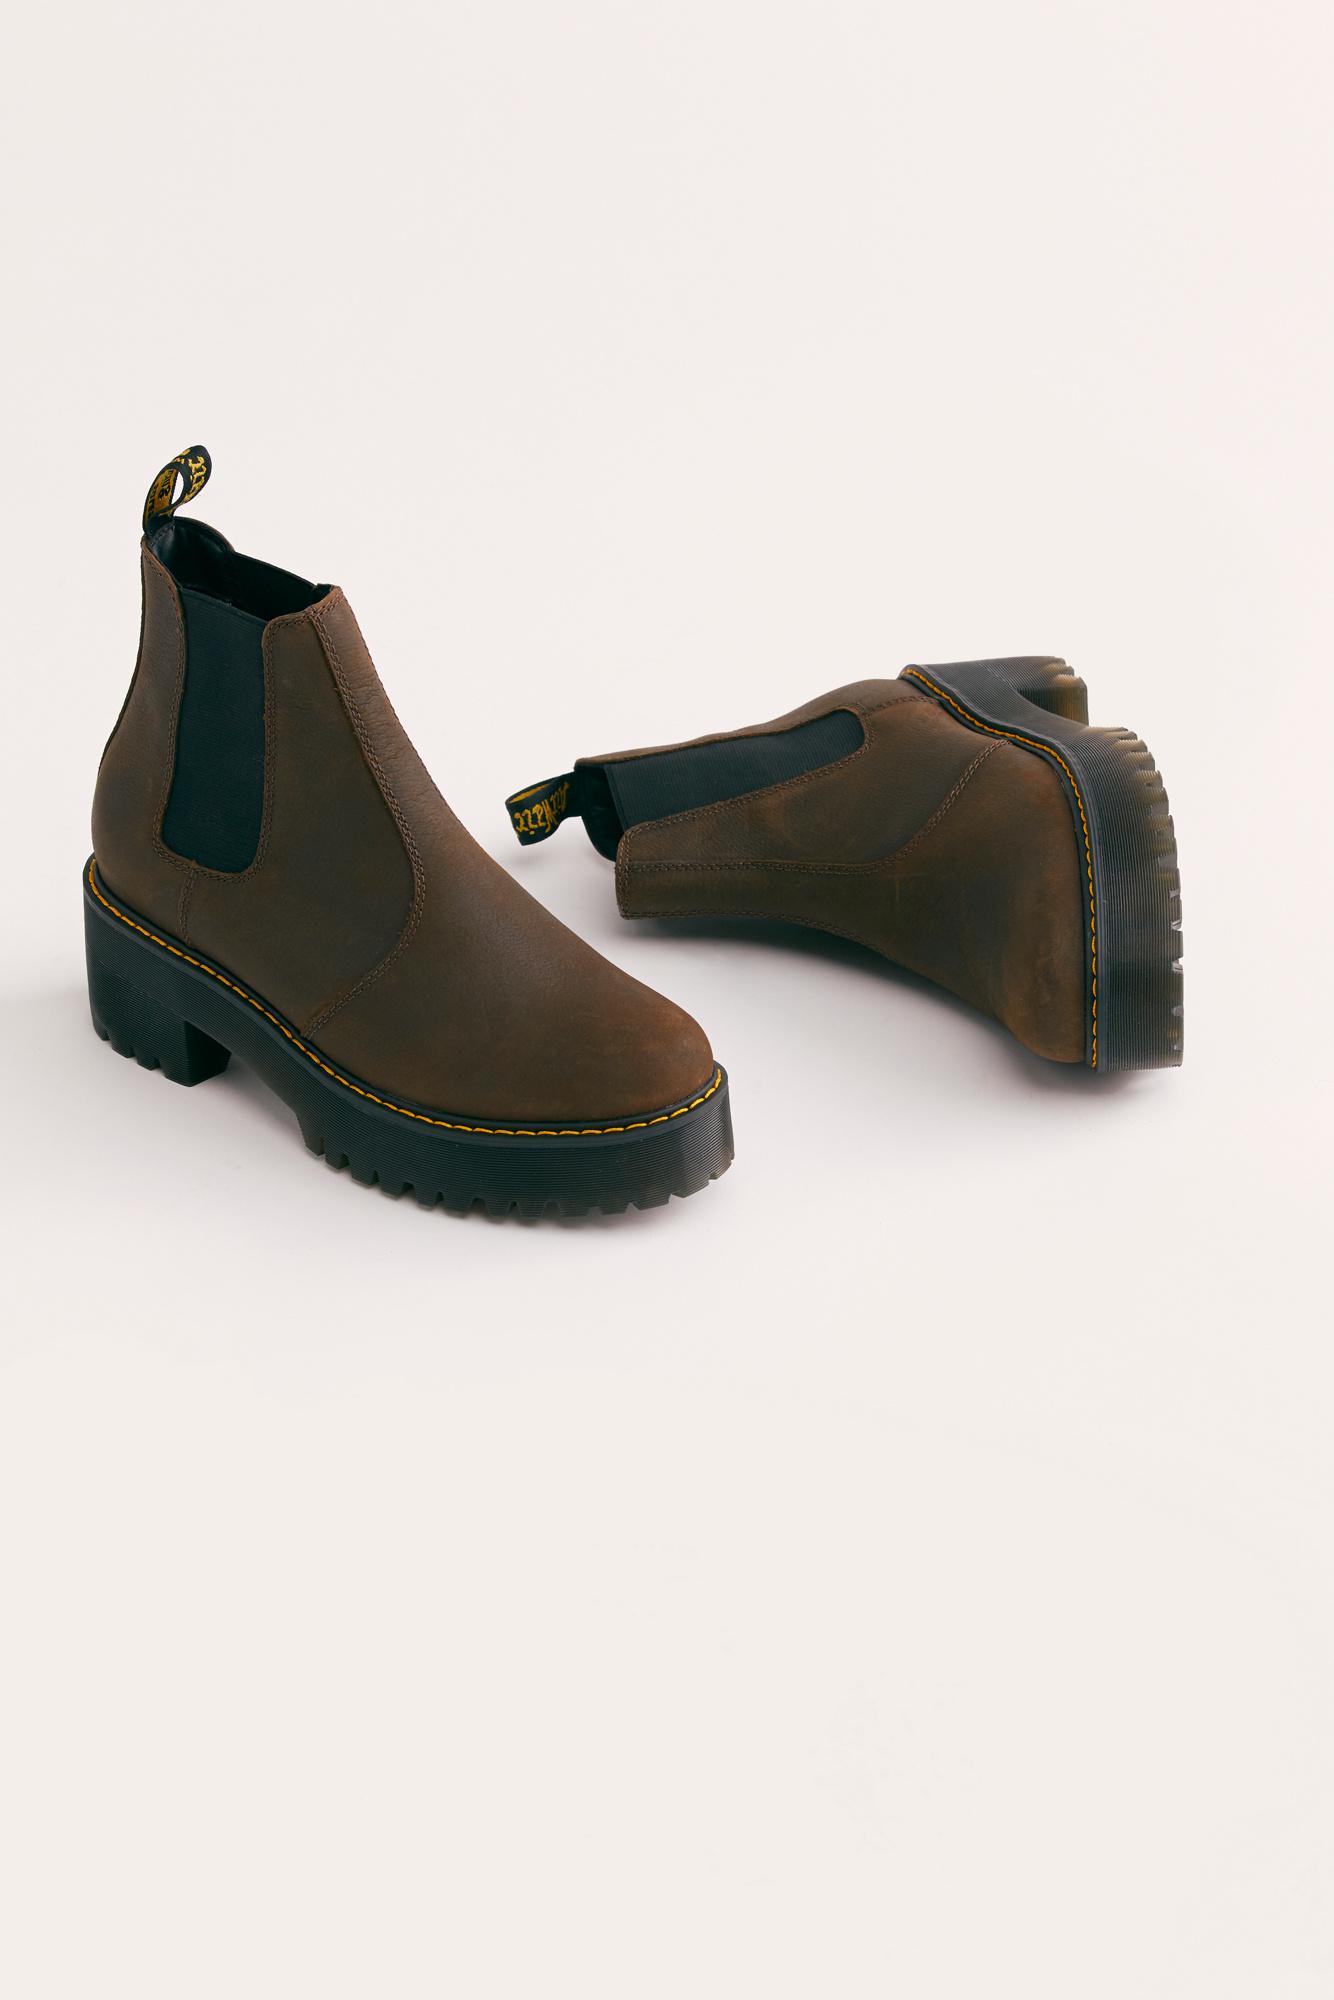 Free People Leather Dr. Martens Rometty Chelsea Boot in Dark Brown (Brown)  - Lyst